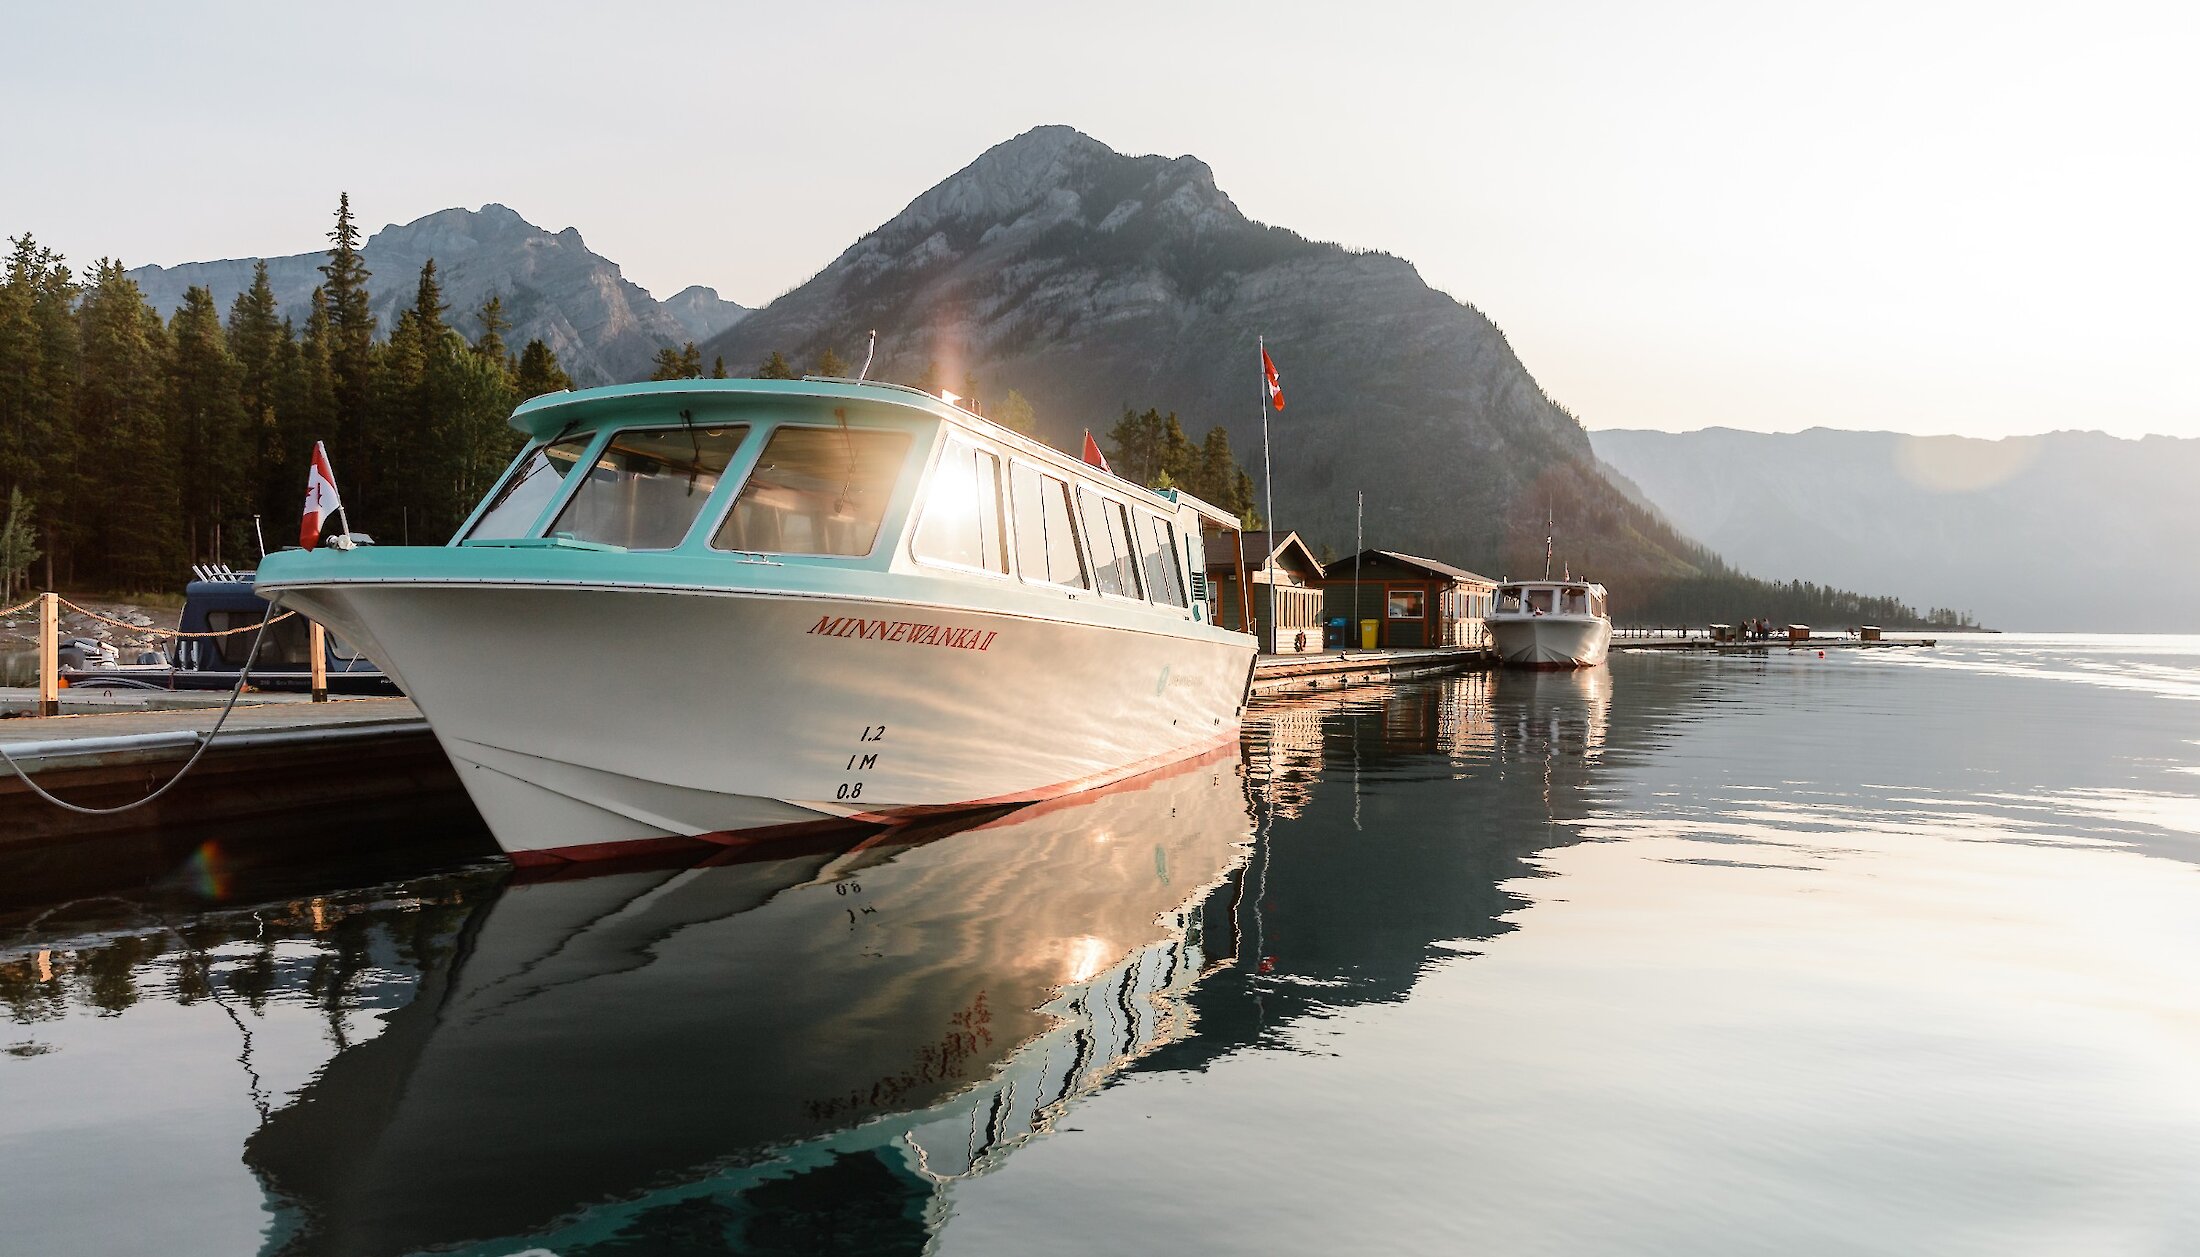 A boat on lake minnewanka during sunset with the mountains surrounding